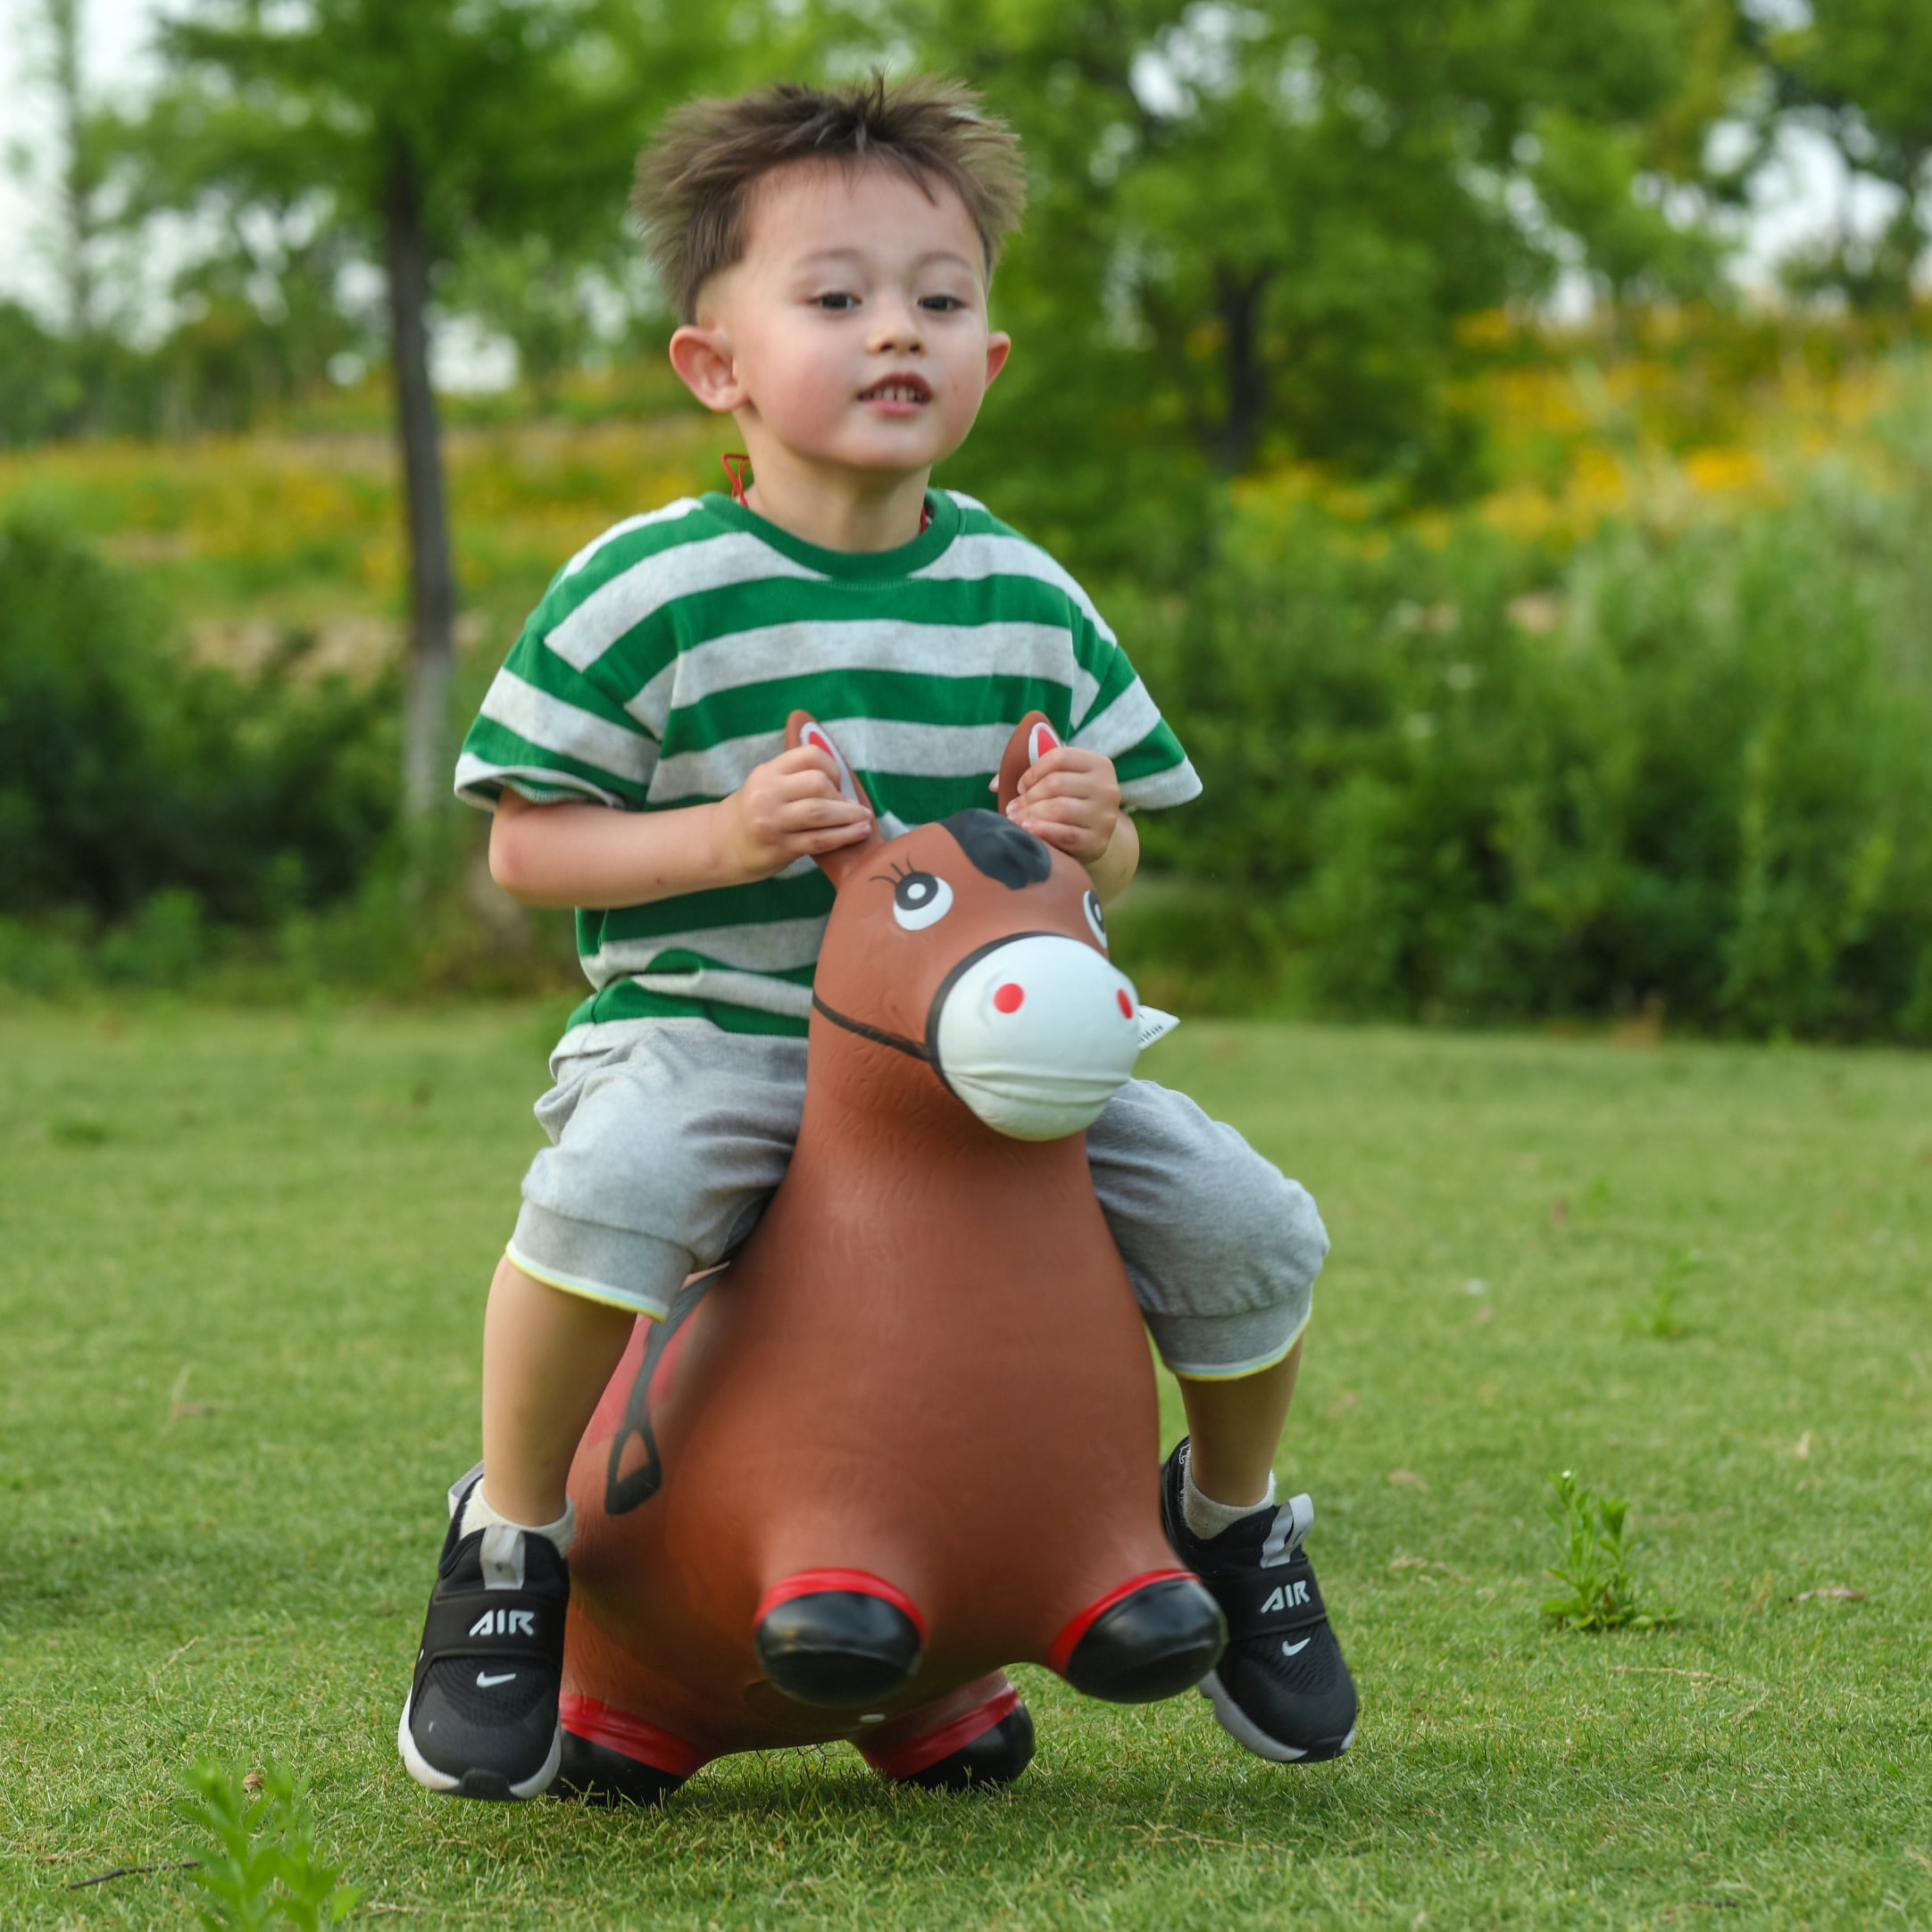 Red Bouncing Hopper Animals Rubber Bouncy Horse for Toddlers Inflatable Farm Hopping//Hoppity Hop Balls Orange Kids//Baby//Infant Riding Toys for Girl and Boy